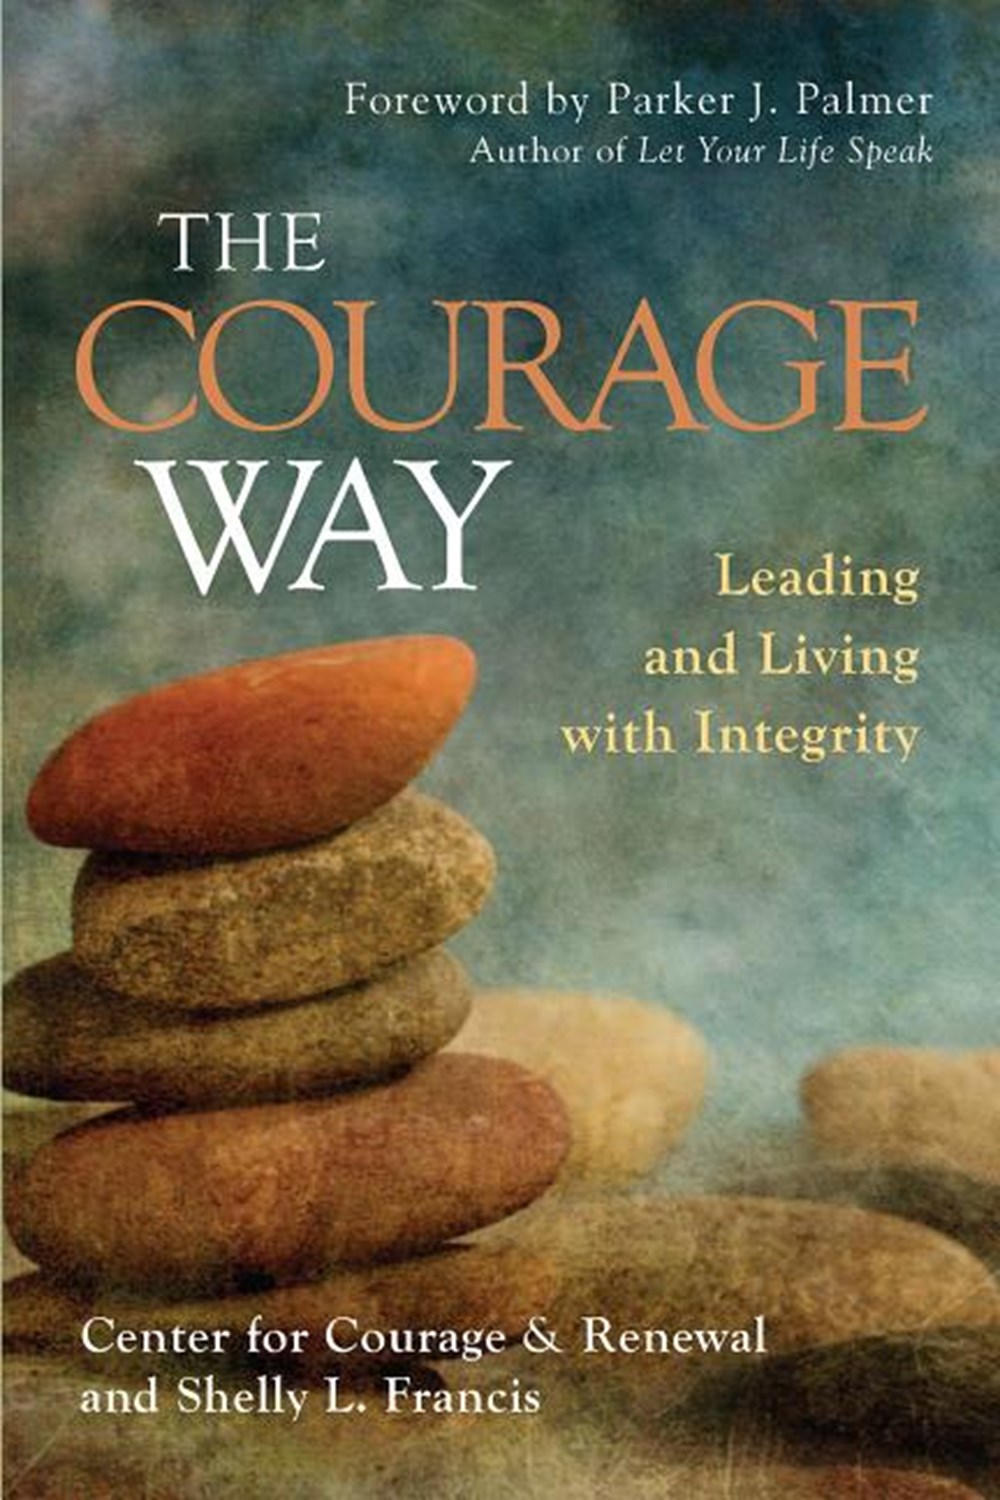 Courage Way: Leading and Living with Integrity